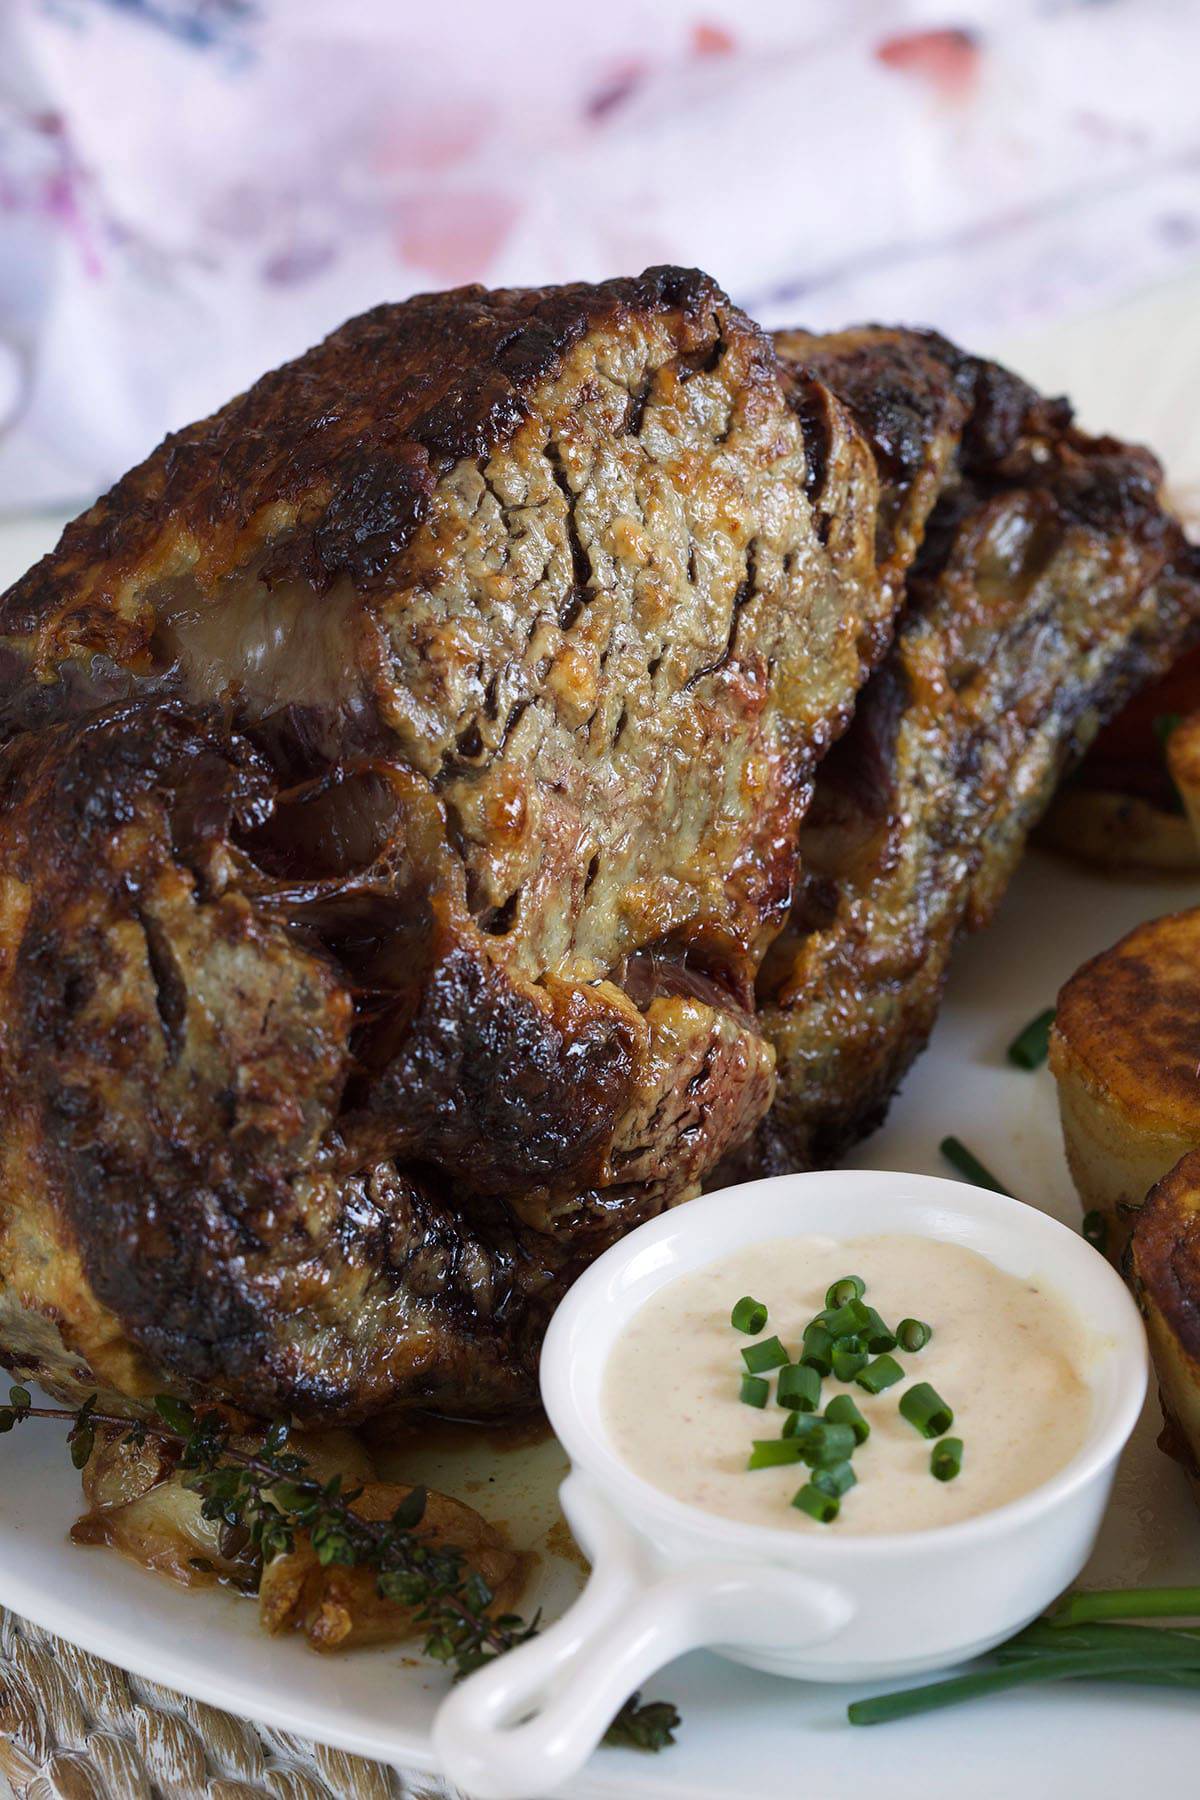 A fully cooked prime rib roast is placed next to a small cup of horseradish. 